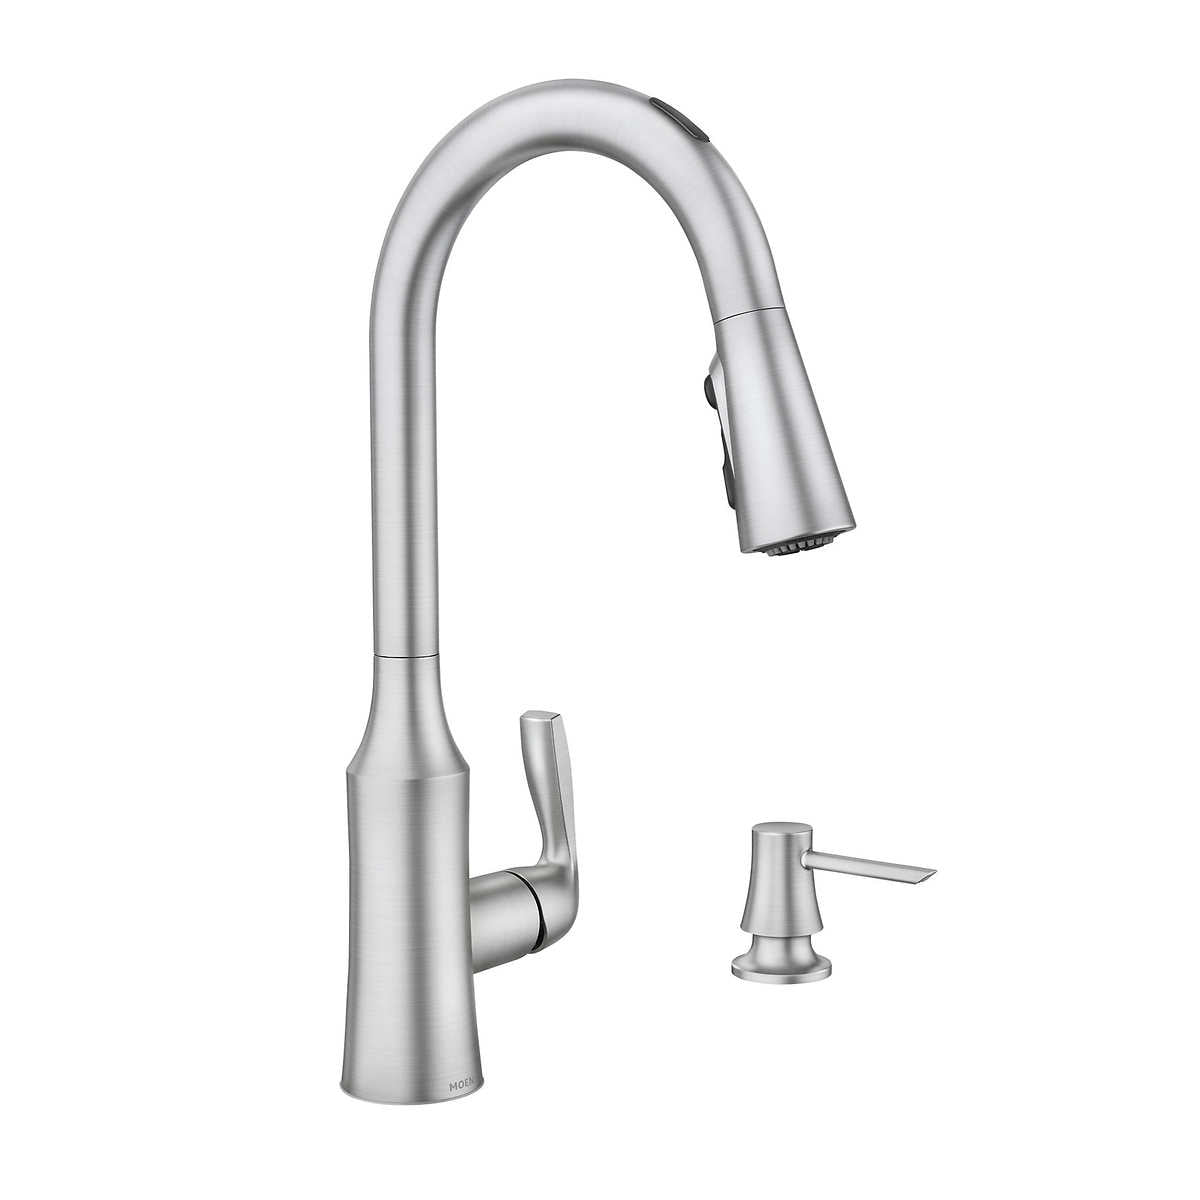 Like NEW - Moen Cadia Pulldown Kitchen Faucet - Retail $189